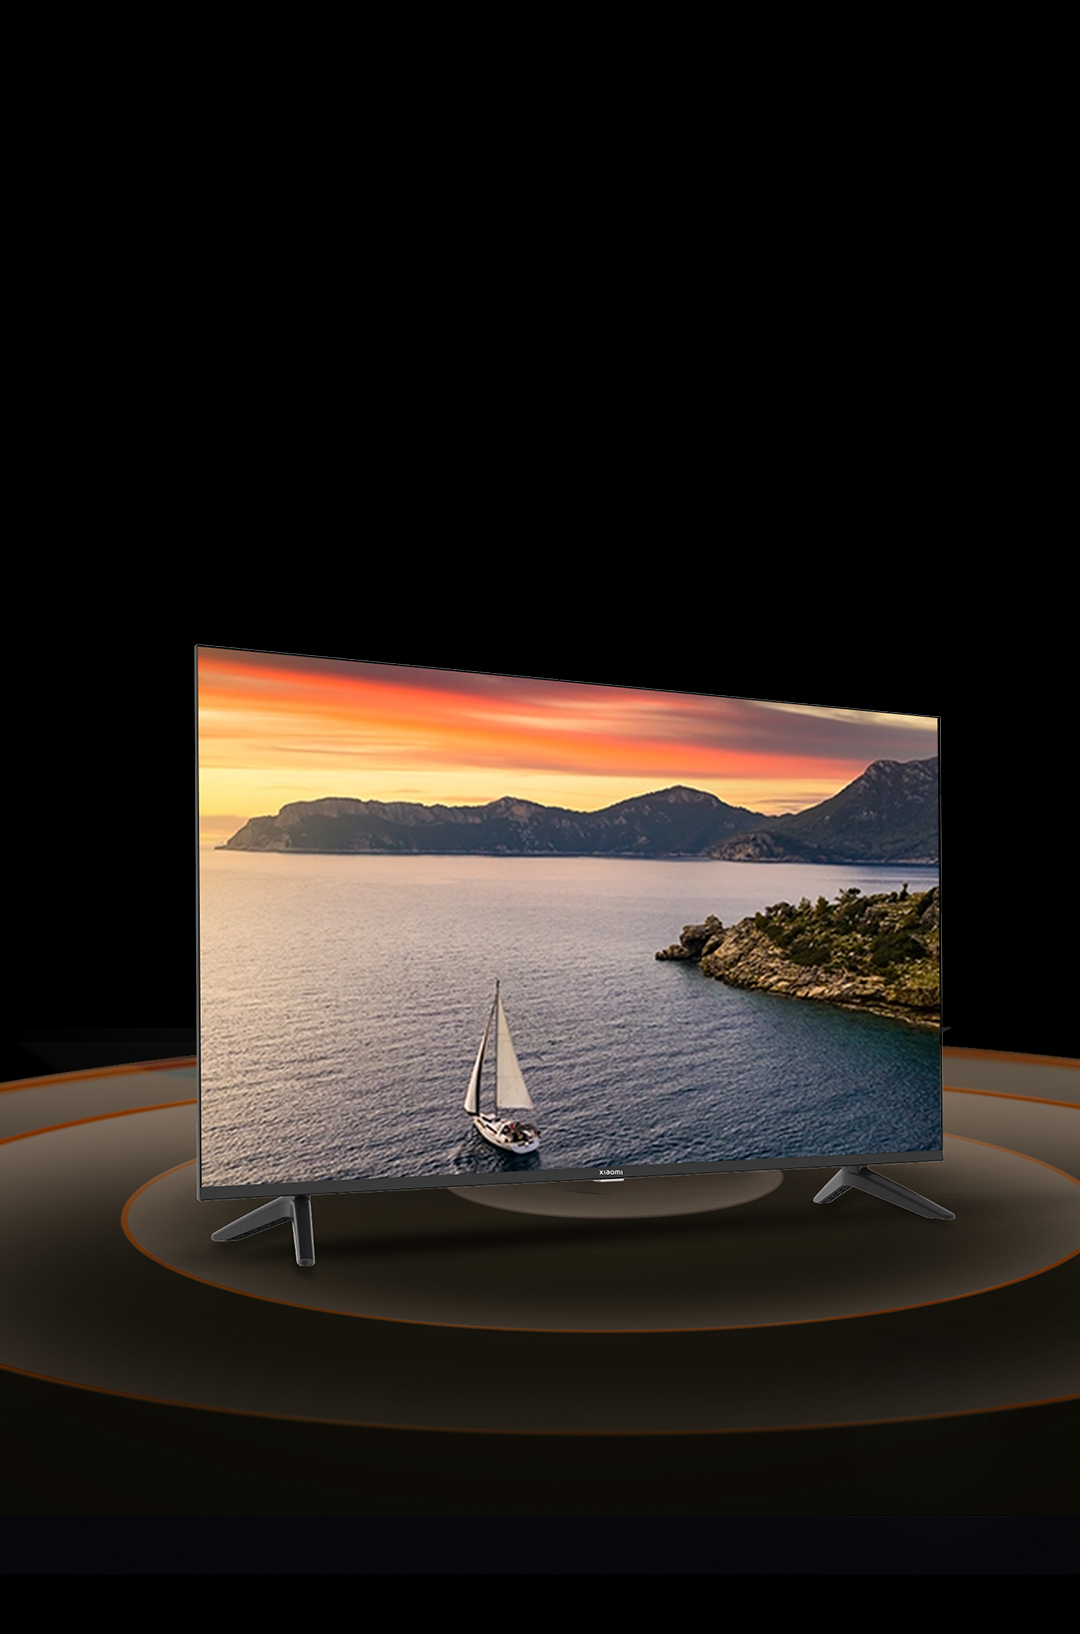 Xiaomi Smart TV X Series unveiled in sizes ranging from 43 to 65 inches;  see specs and price - BusinessToday